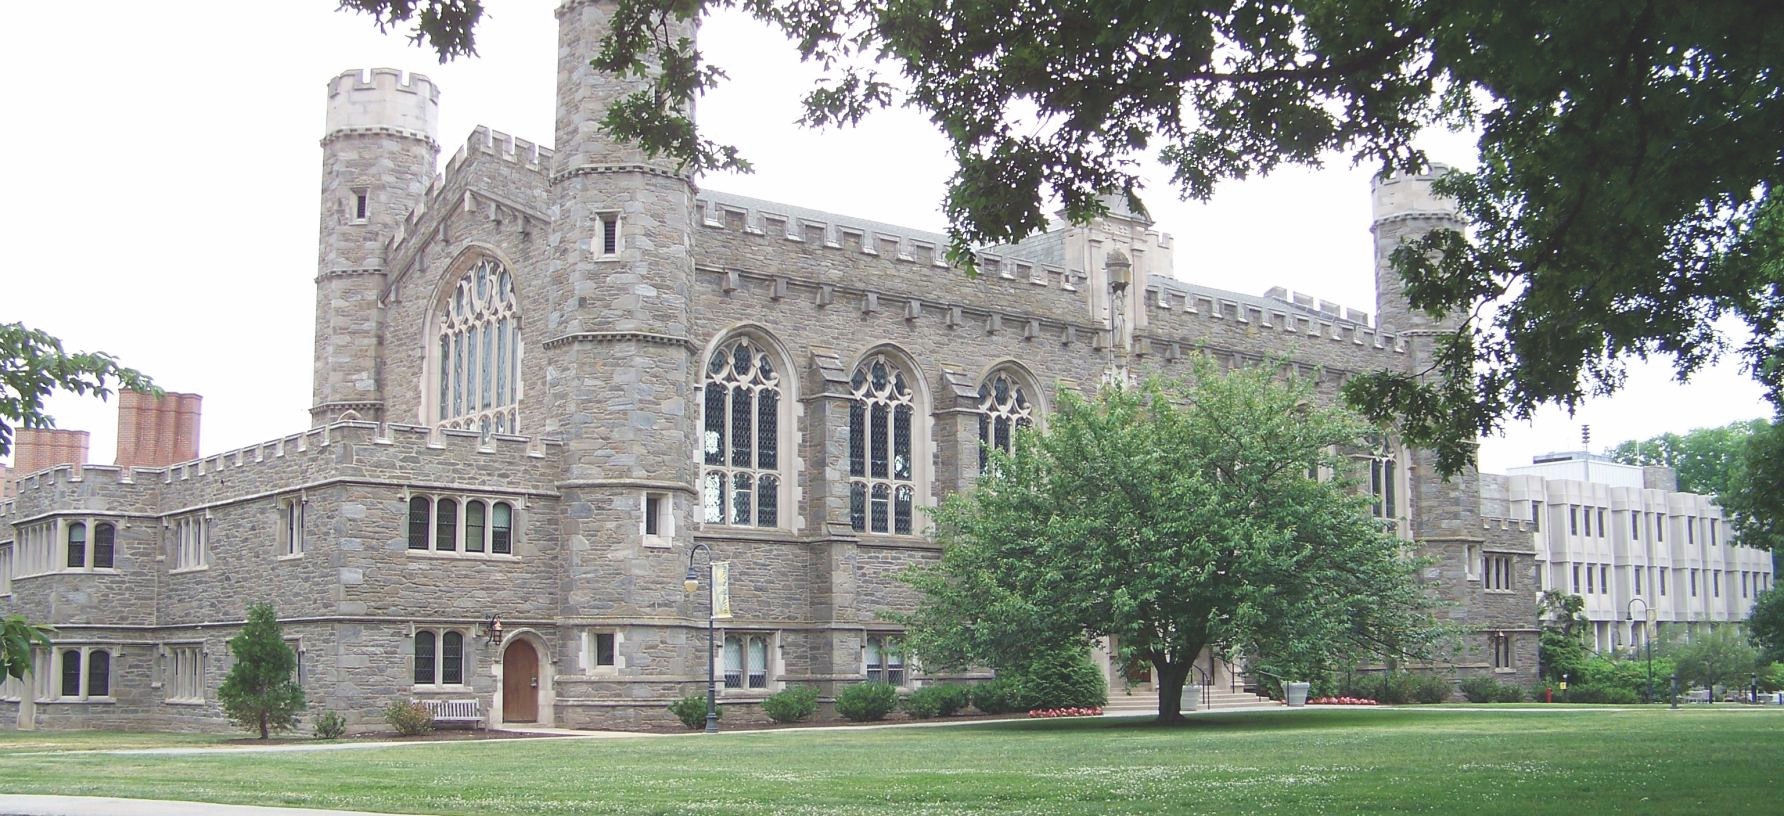 Stone building on the campus of Bryn Mawr College